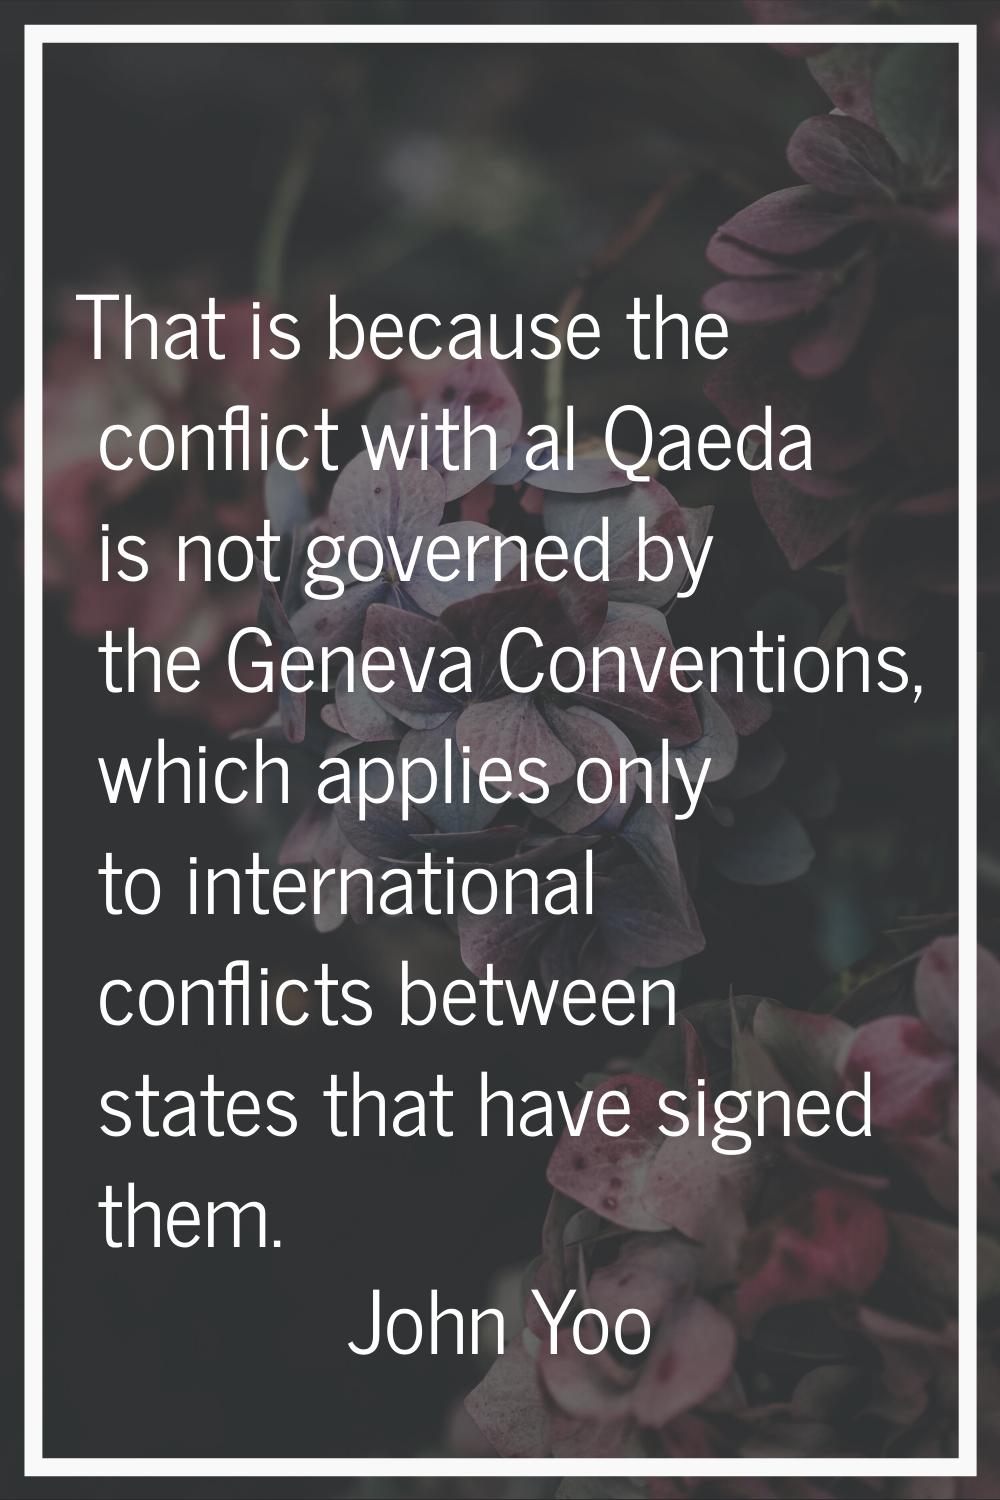 That is because the conflict with al Qaeda is not governed by the Geneva Conventions, which applies